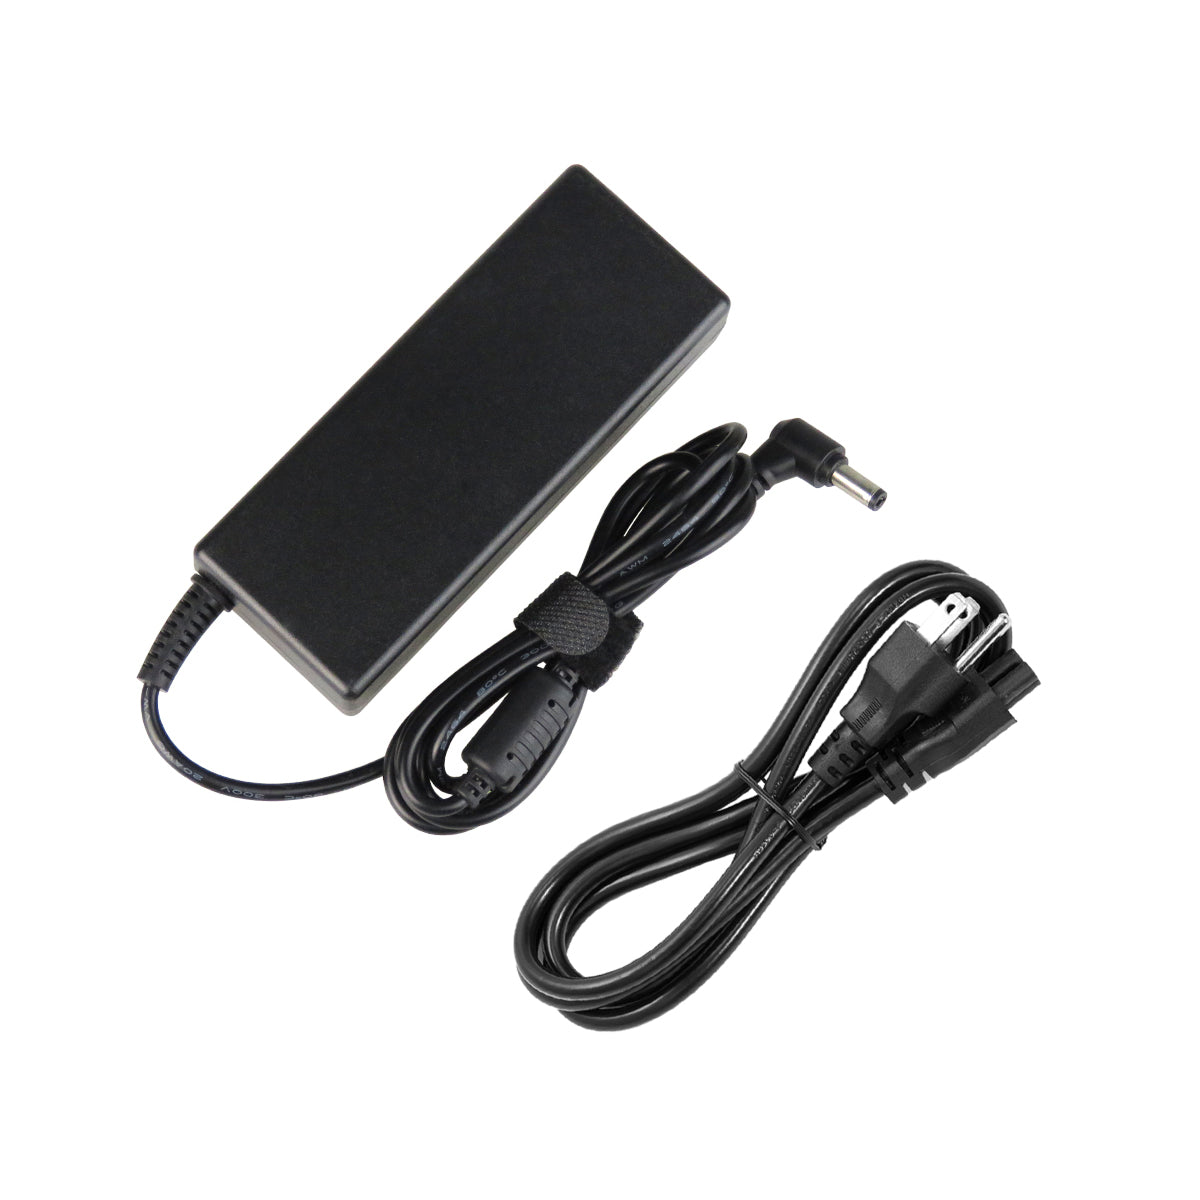 AC Adapter Charger for ASUS N46V Notebook.